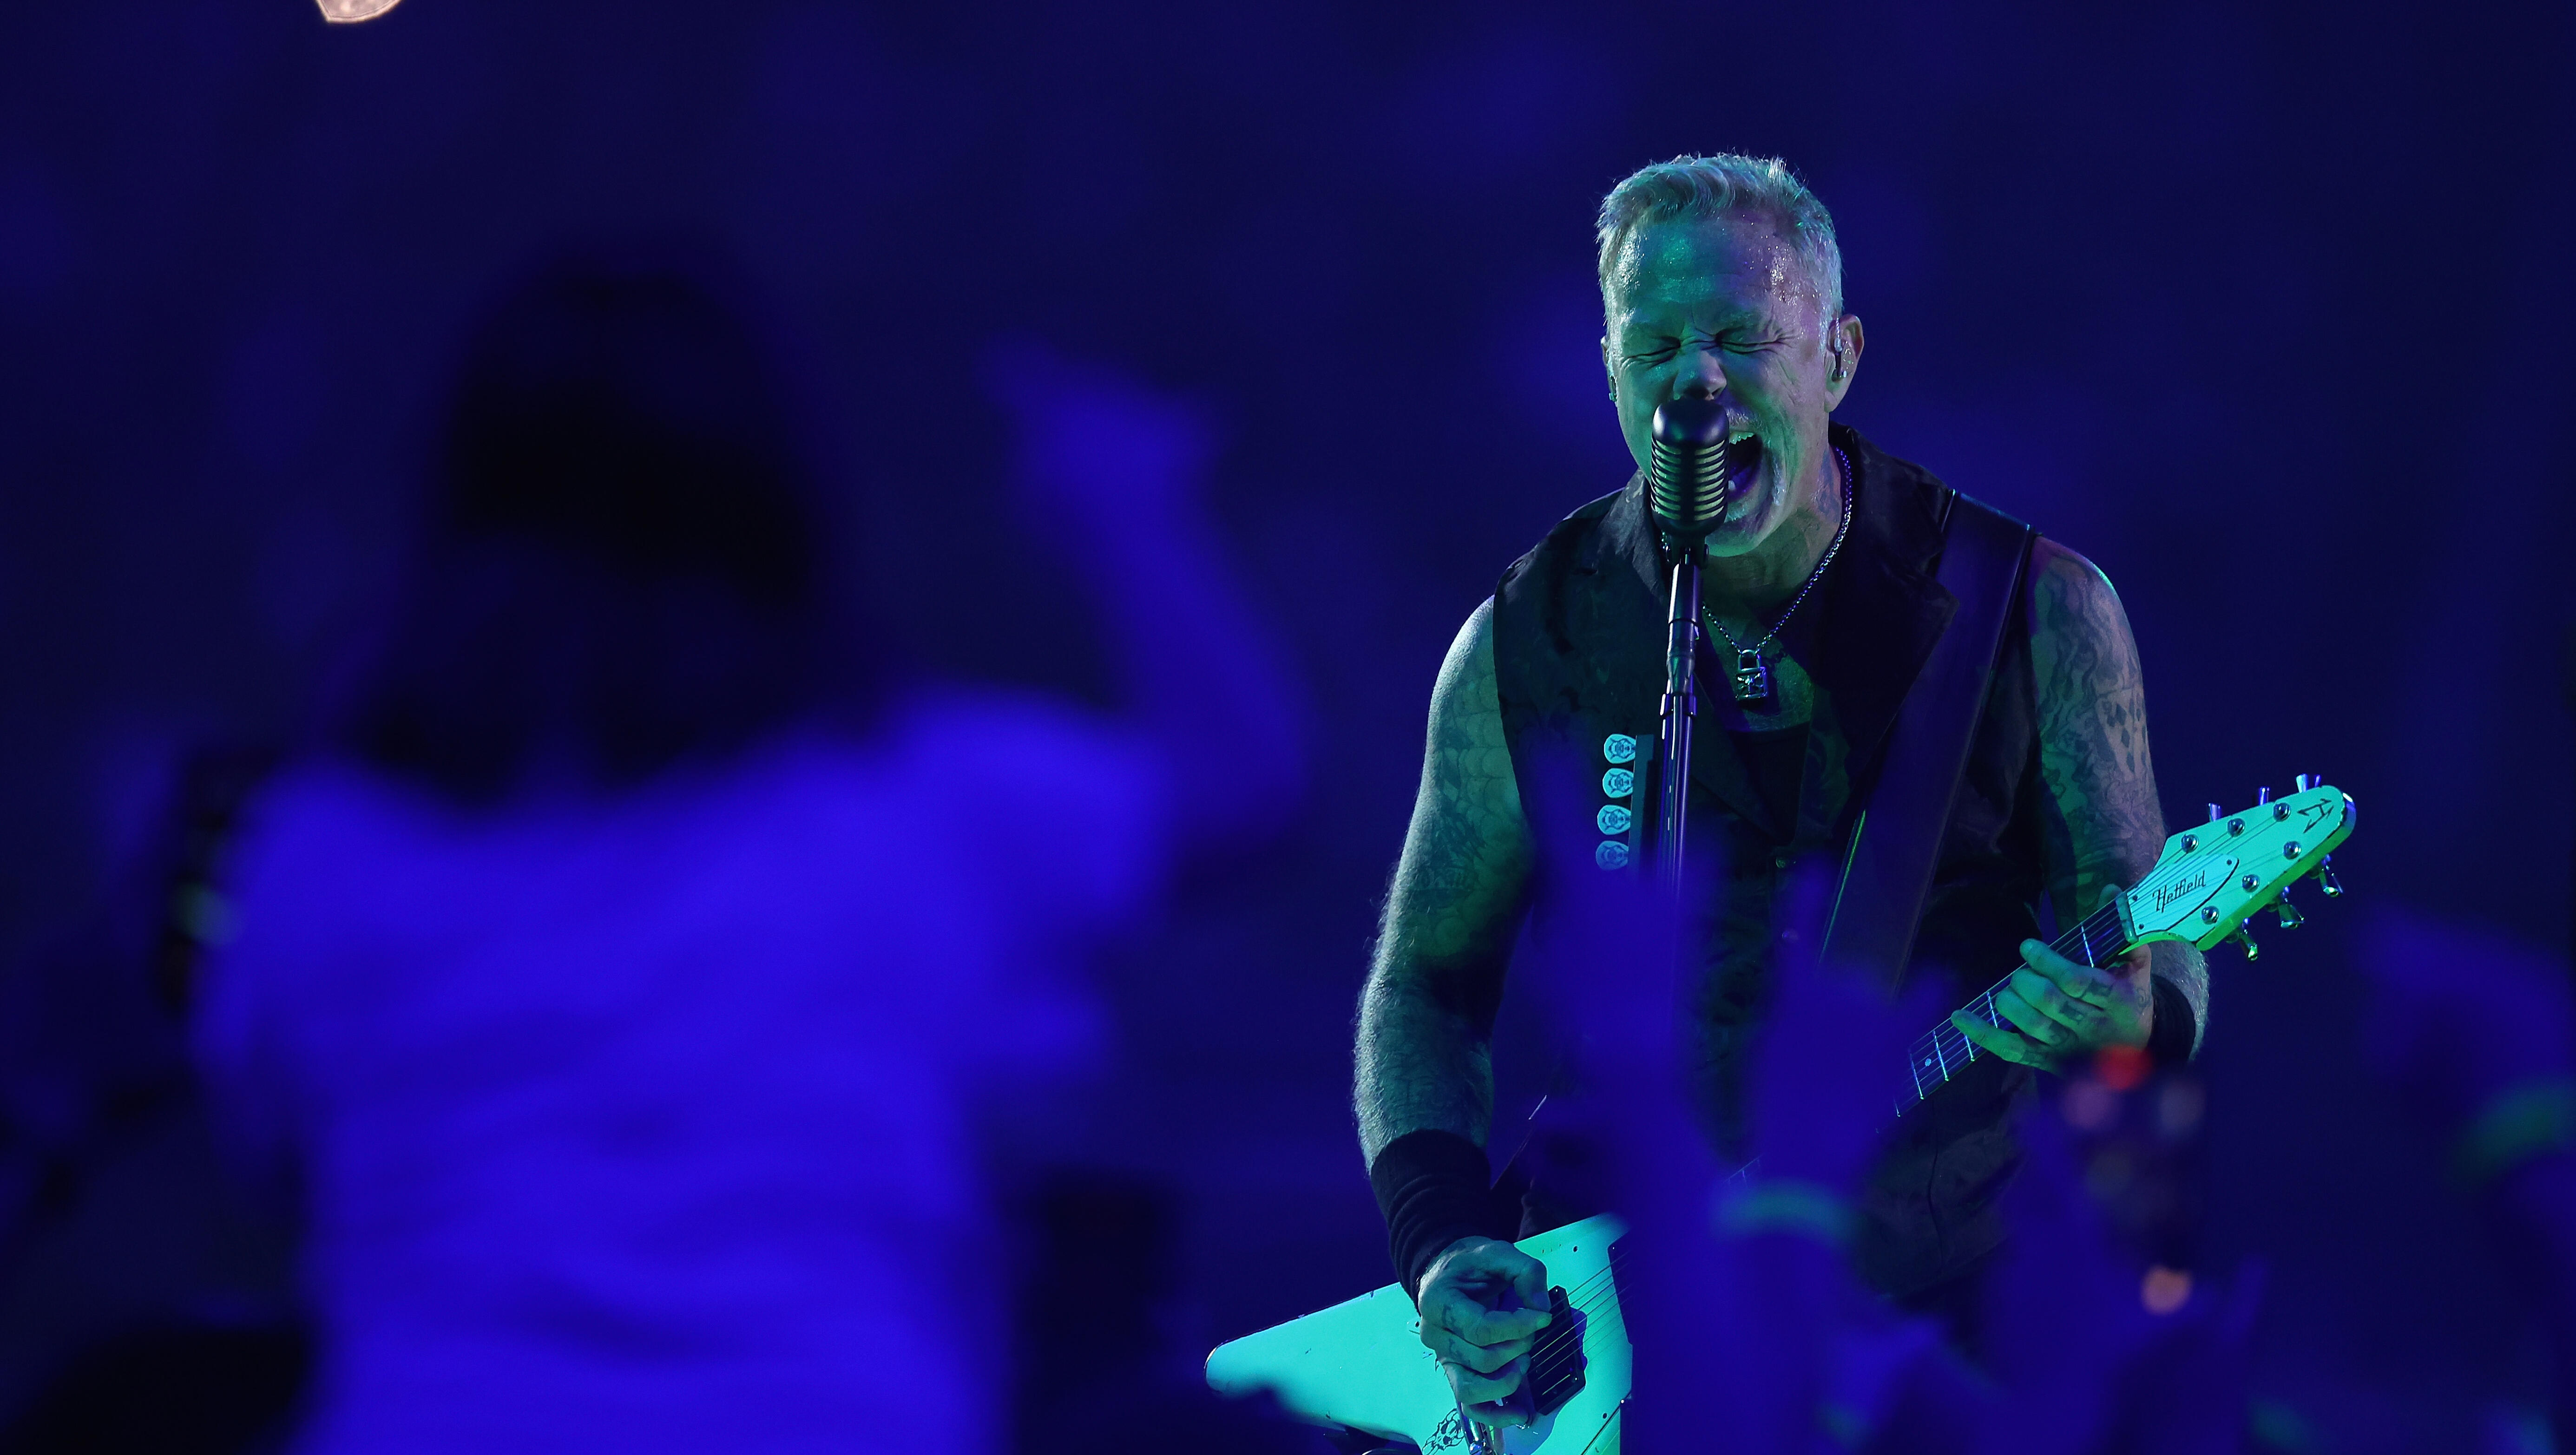 Pro Shot Metallica "Masters of Puppets" Video with Lightning!